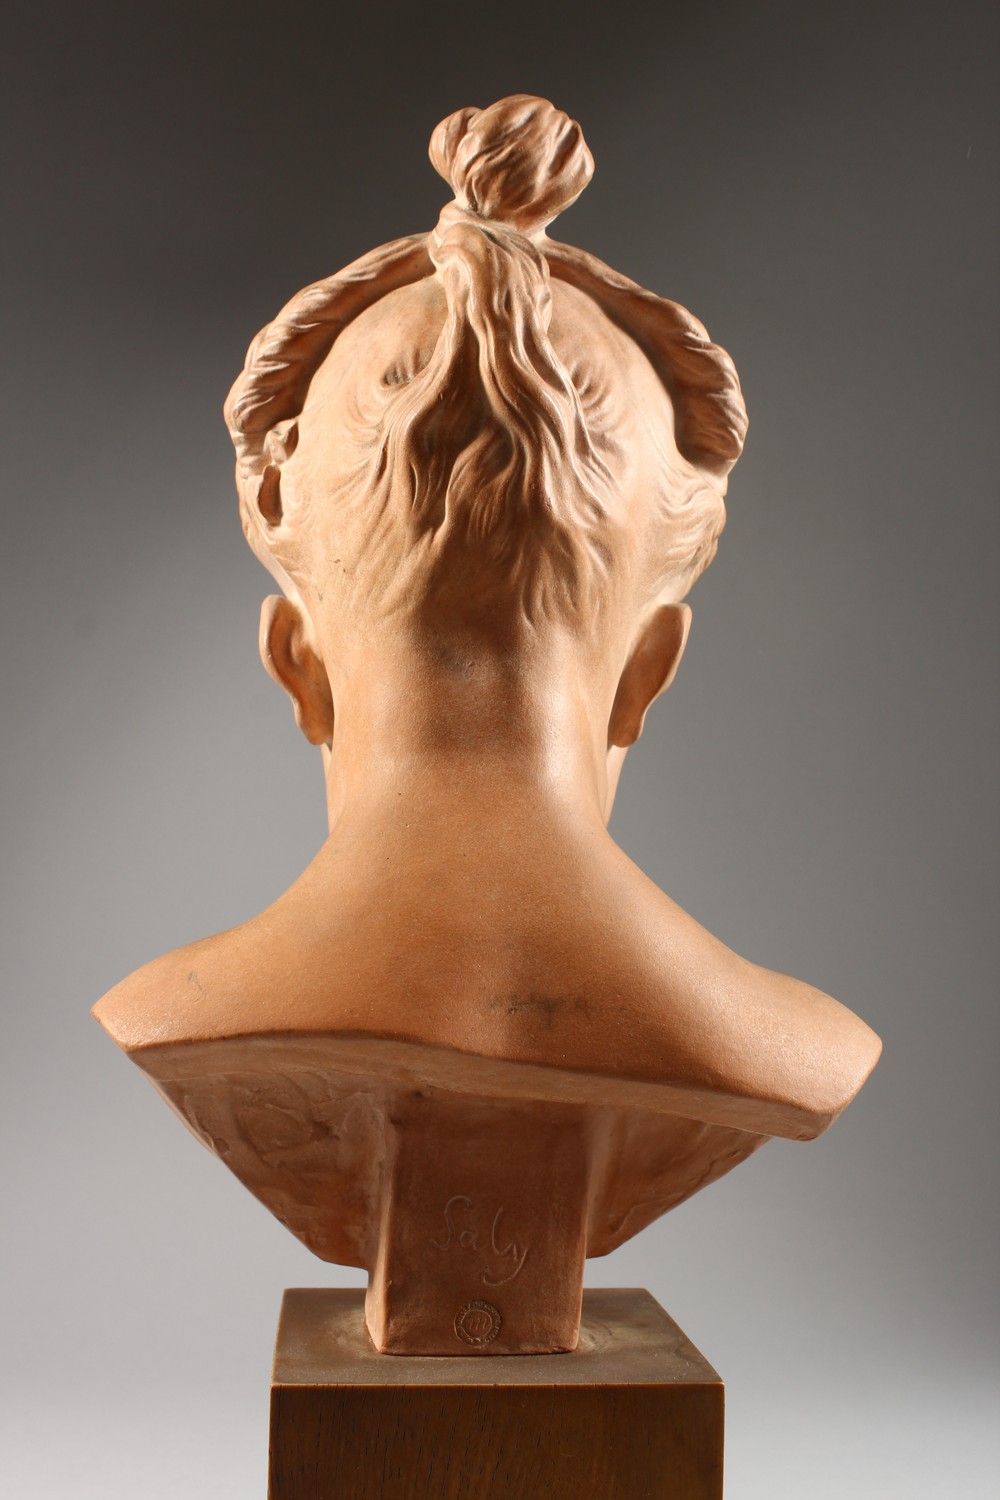 SALY A GOOD TERRACOTTA BUST OF A YOUNG GIRL, on a wooden plinth. Signed Saly, Louvre. 14ins high. - Image 4 of 7